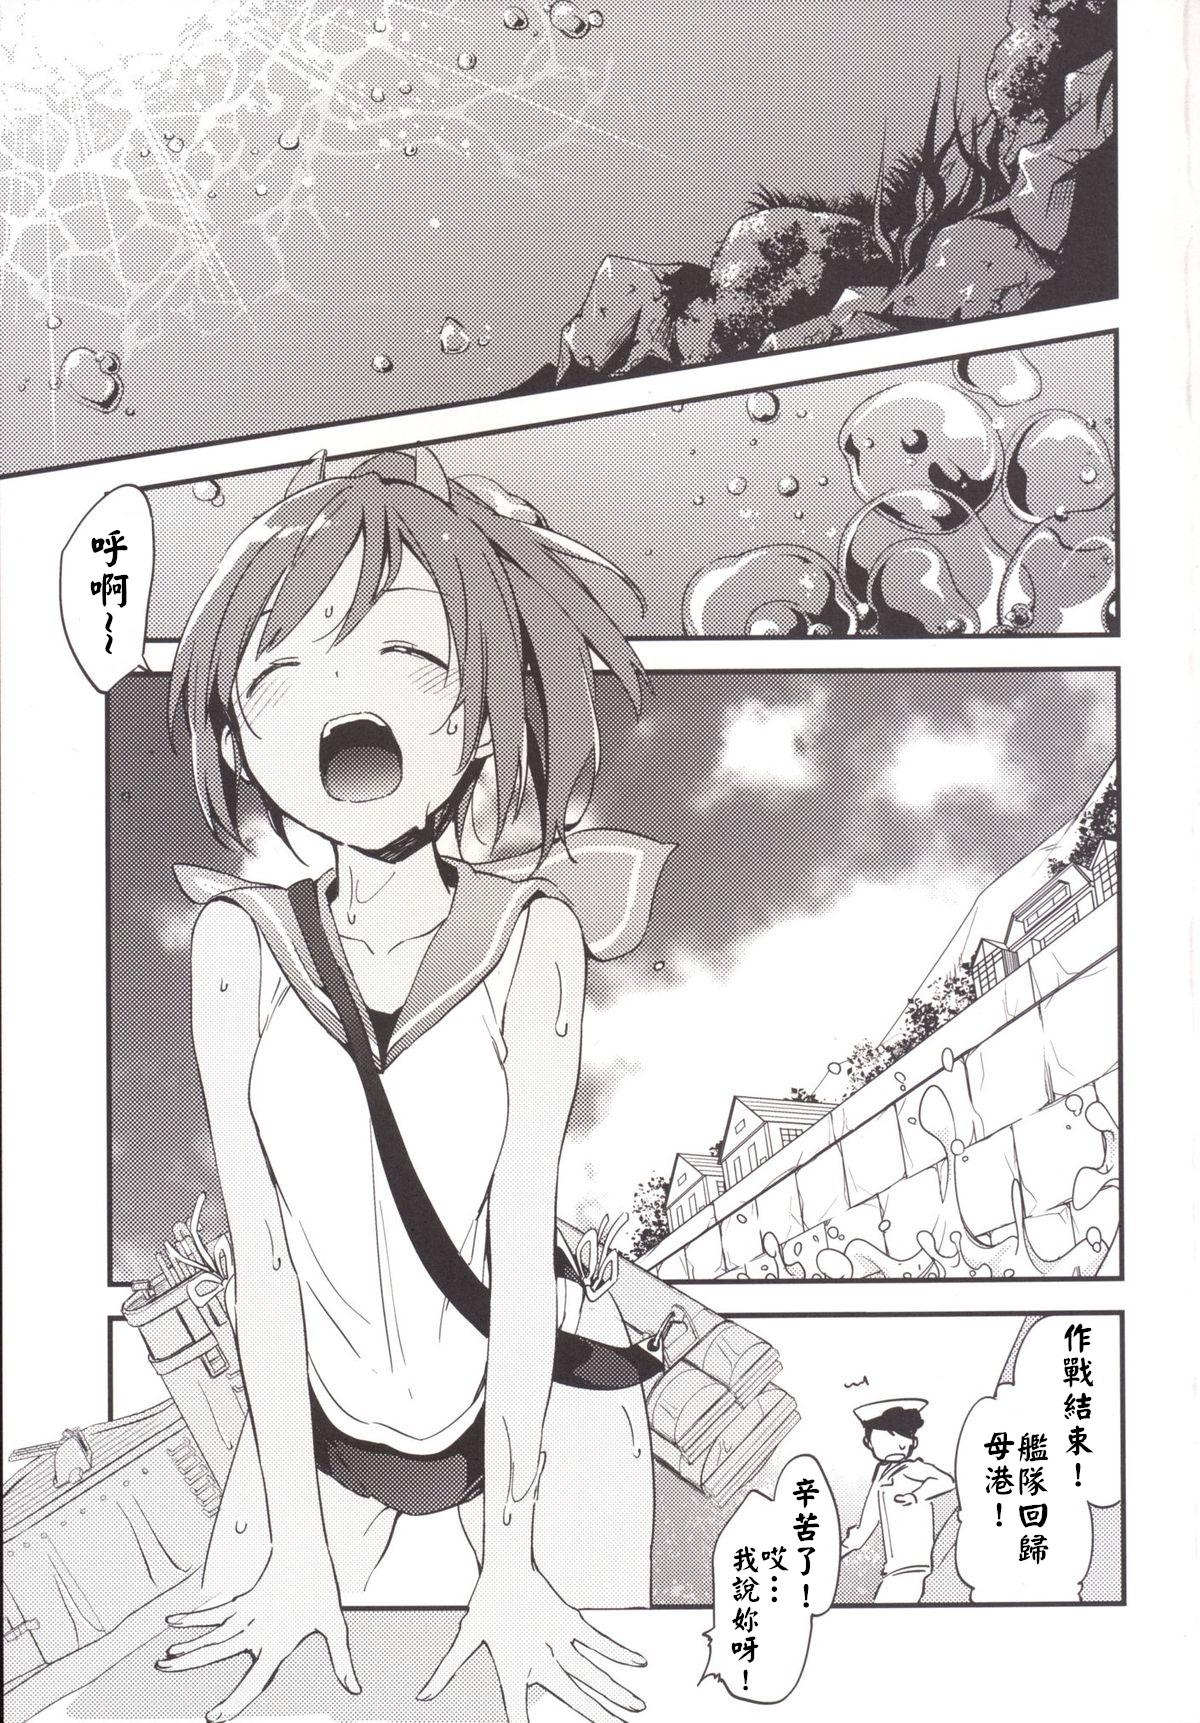 Safadinha 401-chan to Issho! - Kantai collection African - Page 5